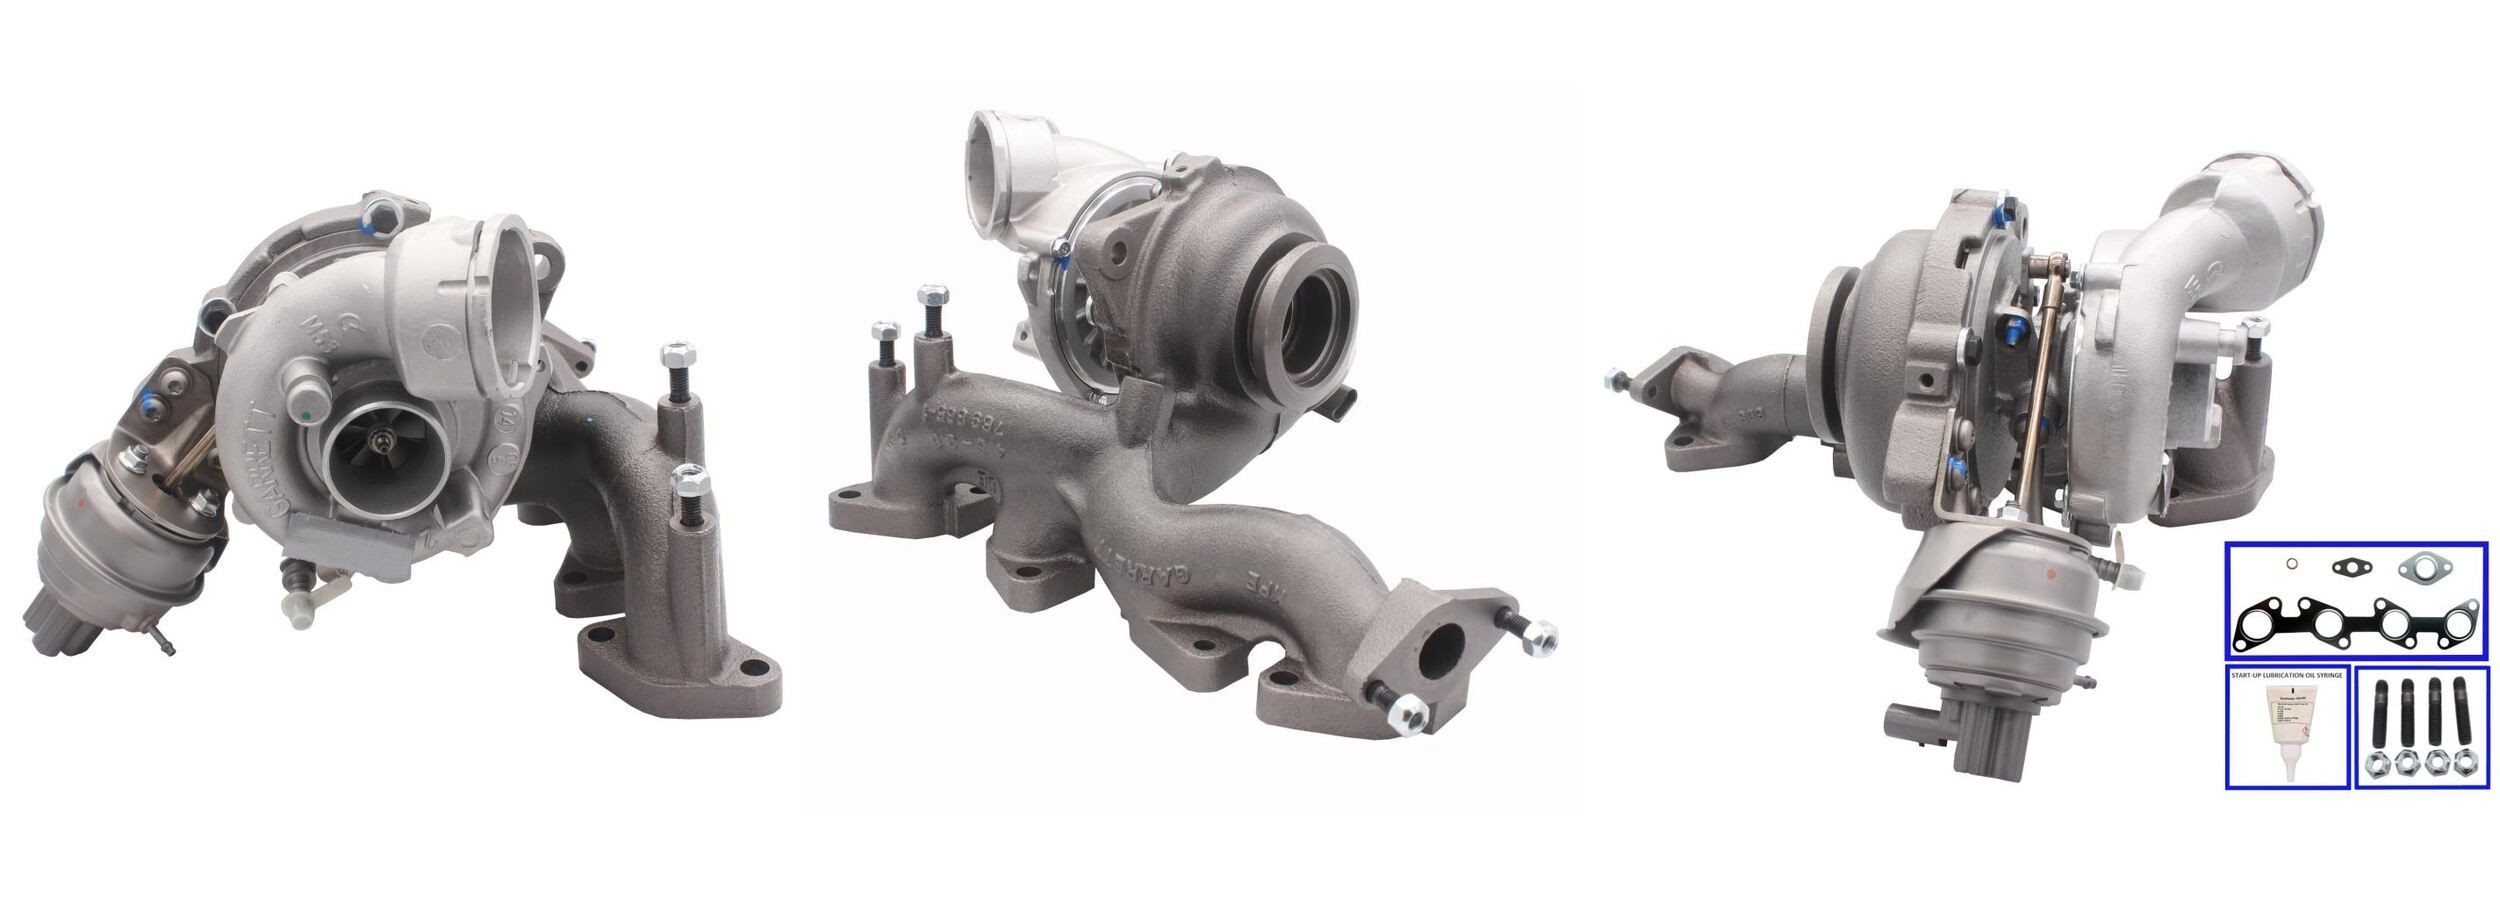 LTRPA7686523 LUCAS Turbocharger JEEP Exhaust Turbocharger, with linear position sensor (LPS), with gaskets/seals